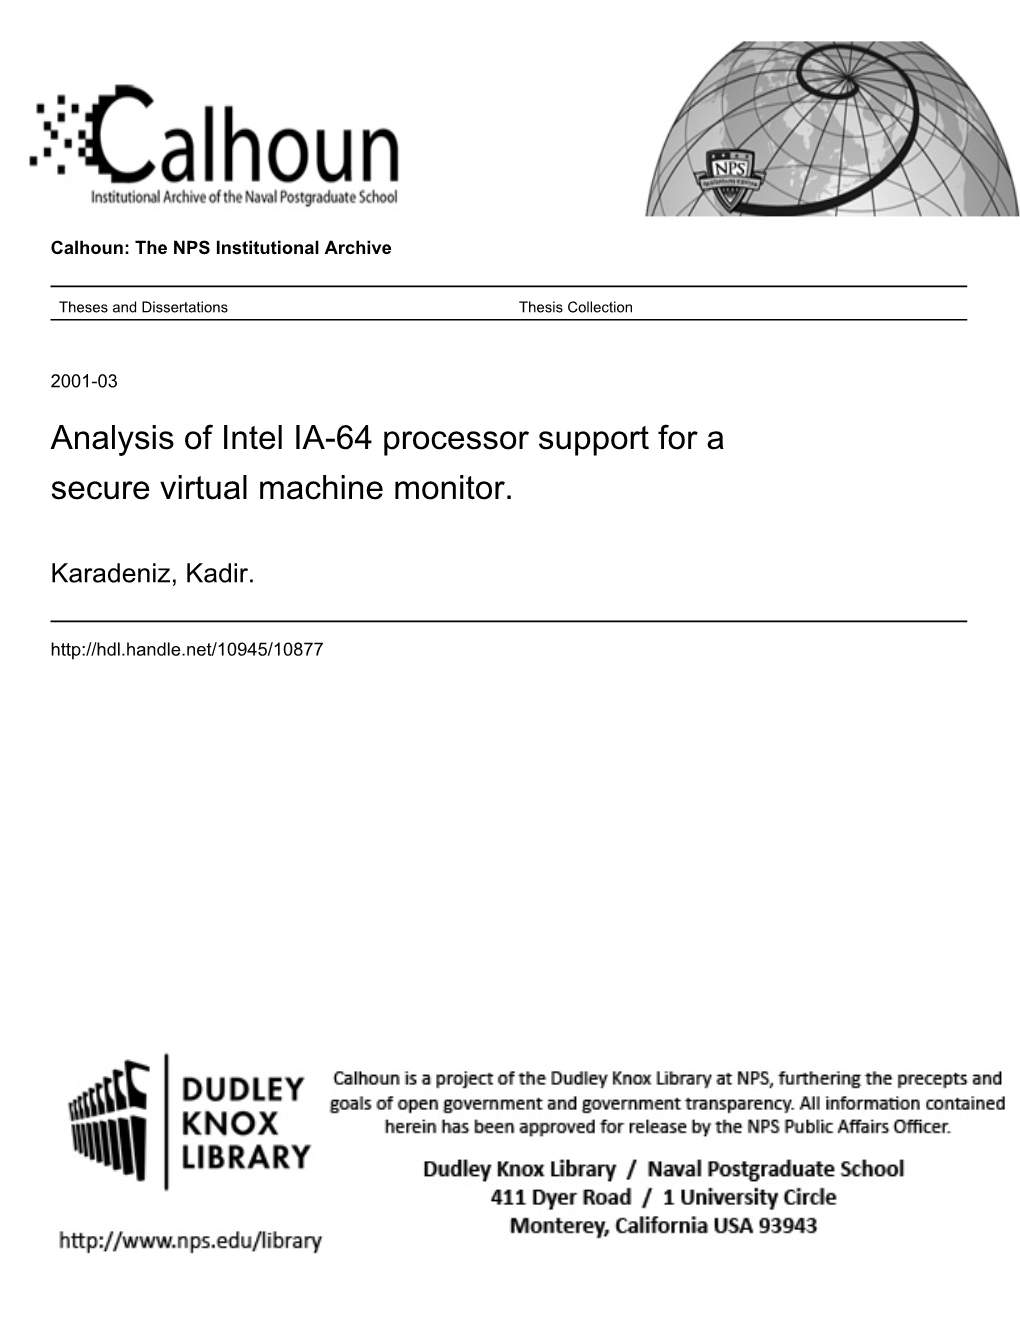 Analysis of Intel IA-64 Processor Support for a Secure Virtual Machine Monitor